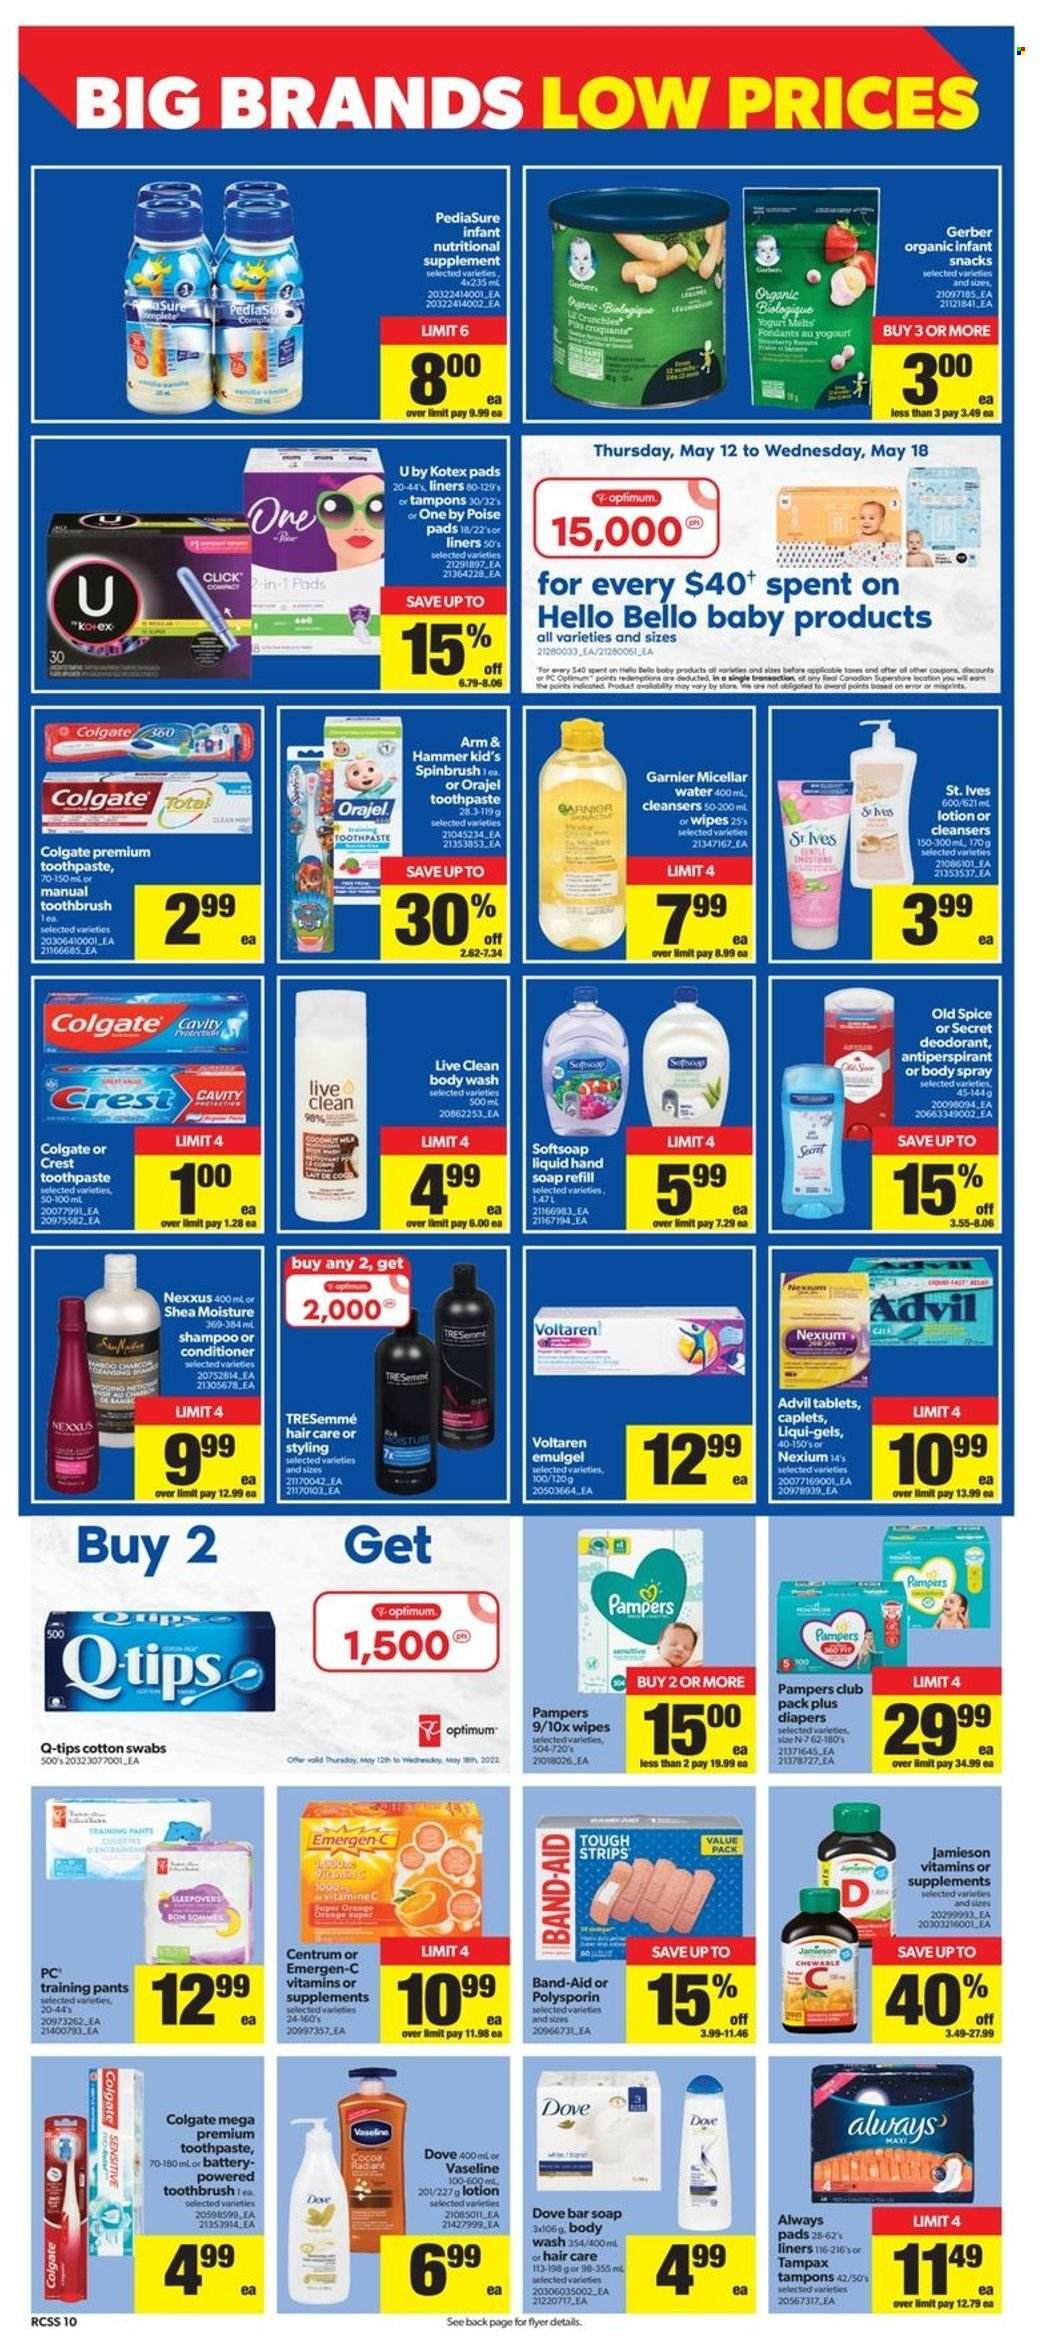 thumbnail - Real Canadian Superstore Flyer - May 12, 2022 - May 18, 2022 - Sales products - strips, snack, Gerber, ARM & HAMMER, spice, tea, wipes, pants, nappies, baby pants, body wash, Softsoap, hand soap, Vaseline, soap bar, soap, toothbrush, toothpaste, Crest, Always pads, Kotex, Kotex pads, tampons, conditioner, TRESemmé, Nexxus, body lotion, body spray, anti-perspirant, Optimum, Nexium, Advil Rapid, Emergen-C, Centrum, band-aid, Dove, Colgate, Garnier, shampoo, Tampax, Pampers, Old Spice, oranges, deodorant. Page 11.